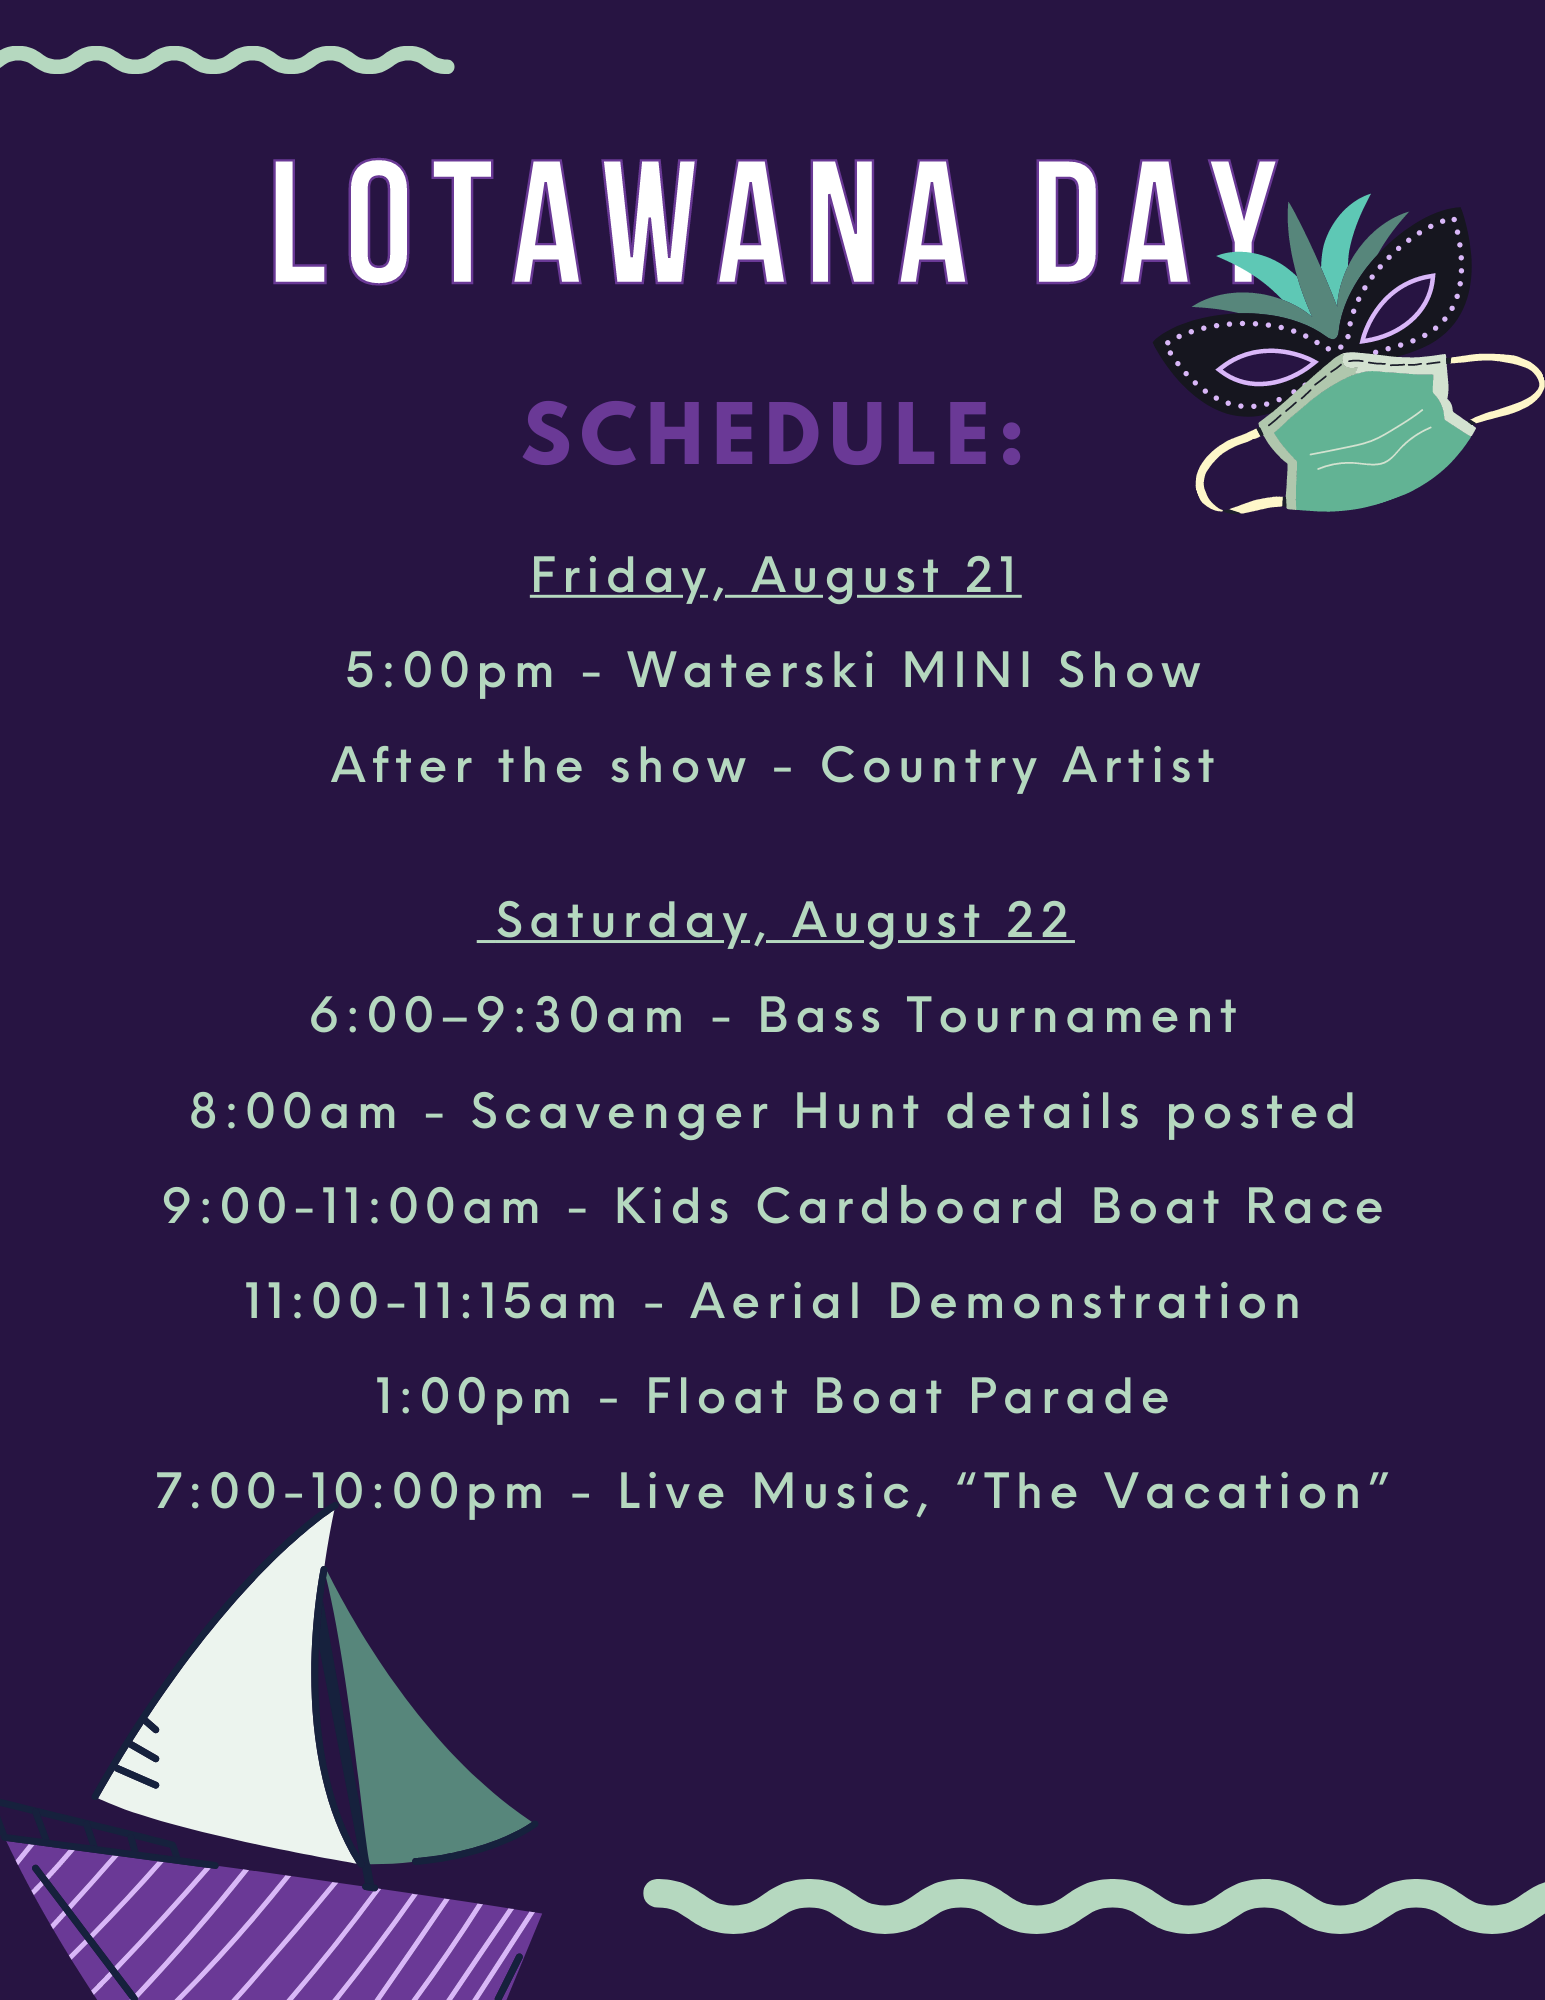 Lotawana Day Schedule and Events 2020